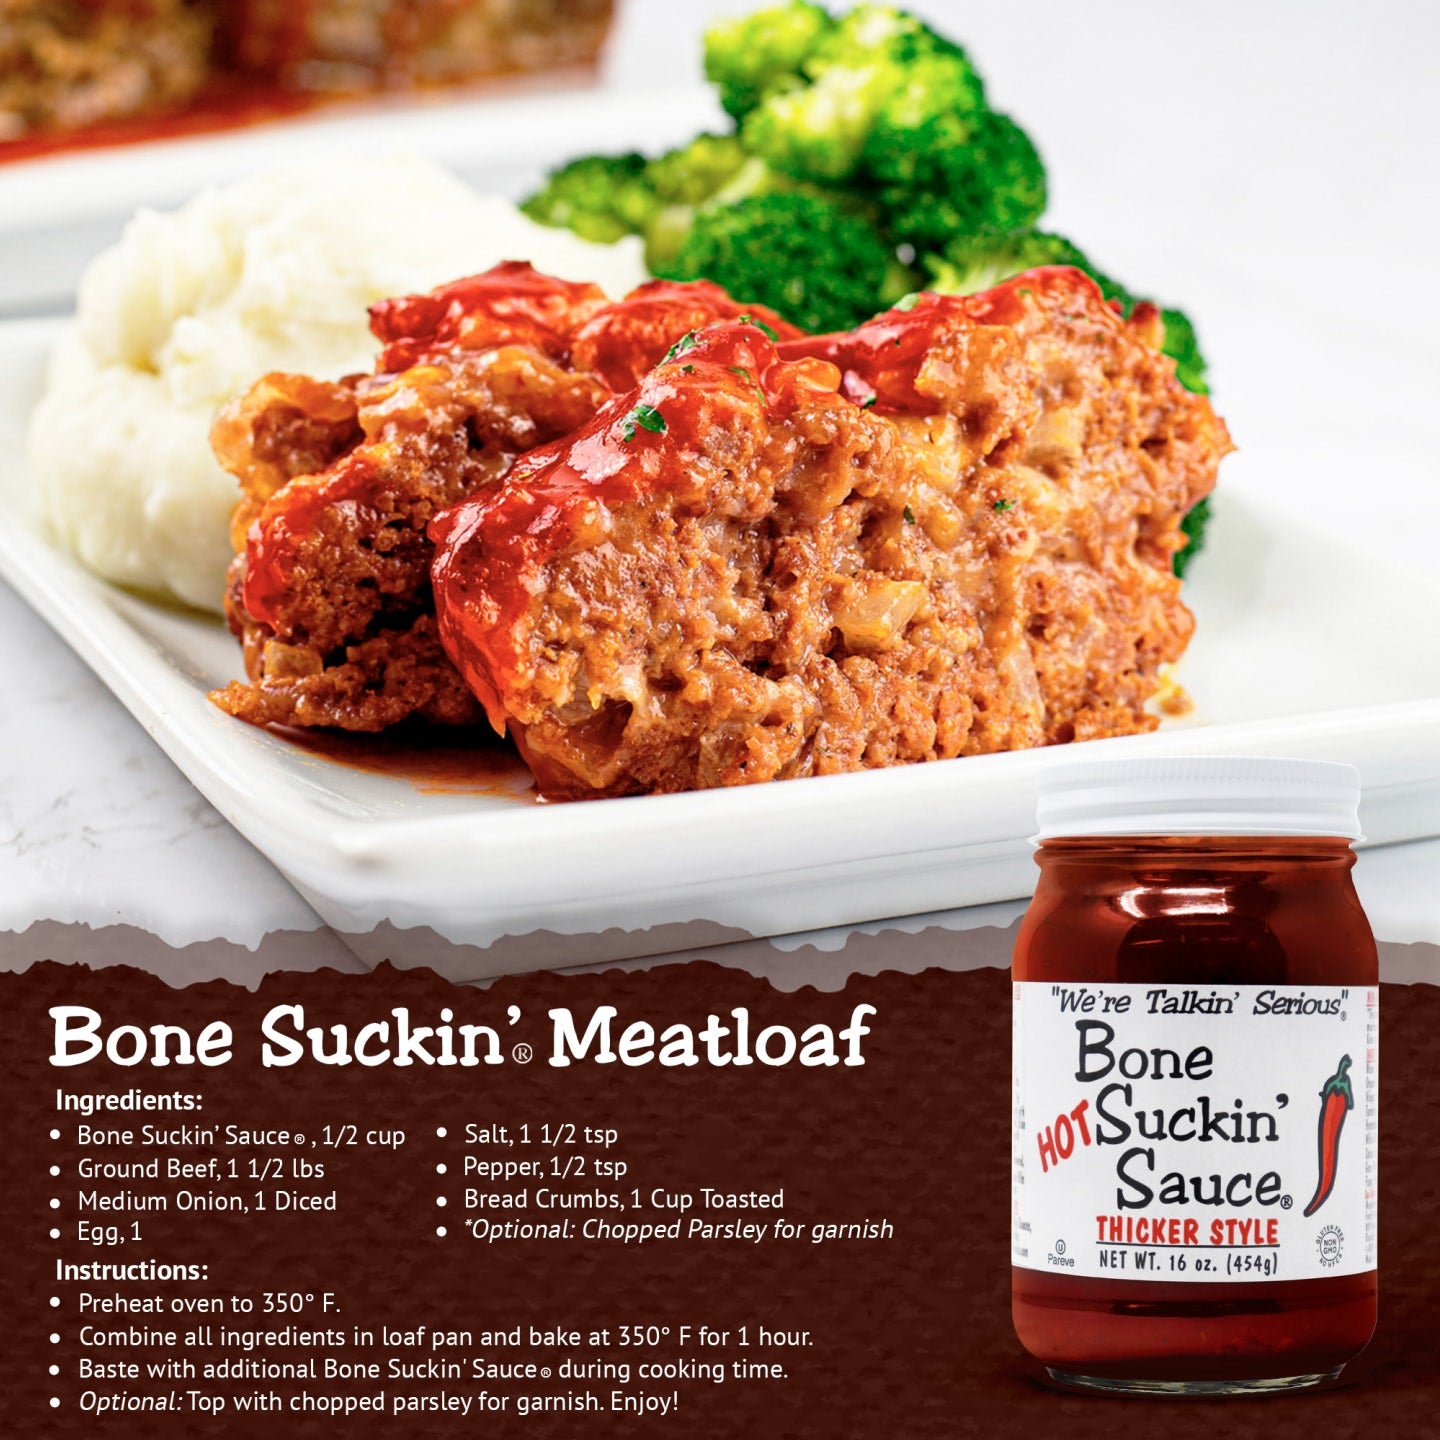 Bone Suckin' Meatloaf. Ingredients: Bone Suckin' Sauce, 1/2 cup. Ground beef, 1.5 lbs. Medium onion, 1 diced. Egg, 1. Salt, 1.5 tsp. pepper, 1.5 tsp. Bread crumbs, 1 cup toasted. Instructions: Preheat oven to 350 F. Combine all ingredients in loaf pan and bake at 350 F for 1 hour. Baste with additional Bone Suckin' Sauce during cooking time.